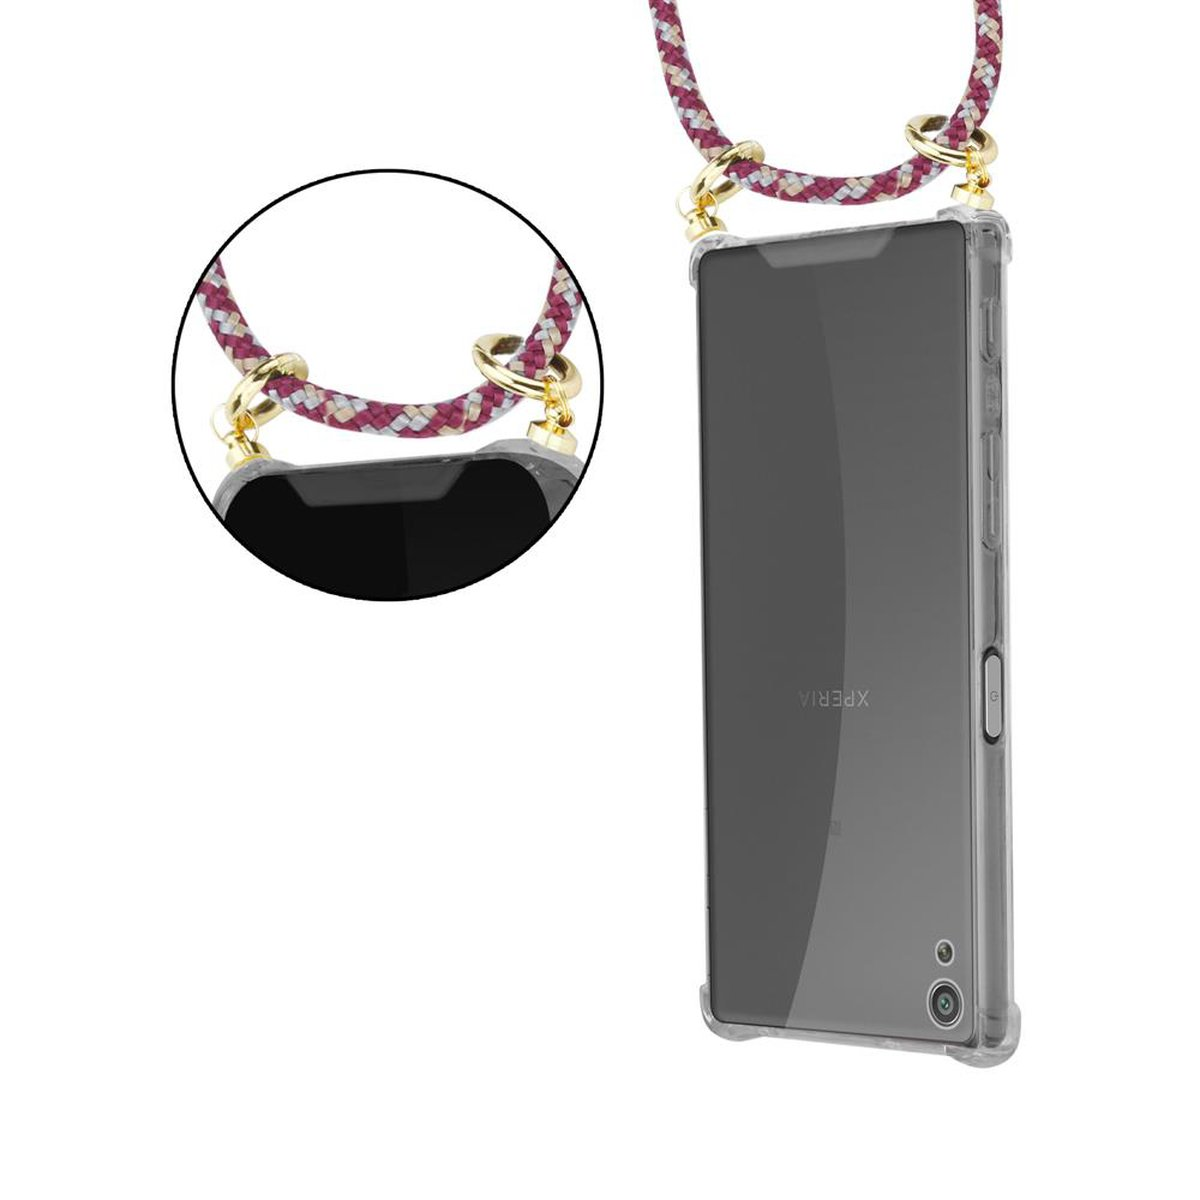 Kordel abnehmbarer Band Ringen, CADORABO Backcover, und Sony, Hülle, WEIß Gold XA, Xperia ROT GELB Kette Handy mit